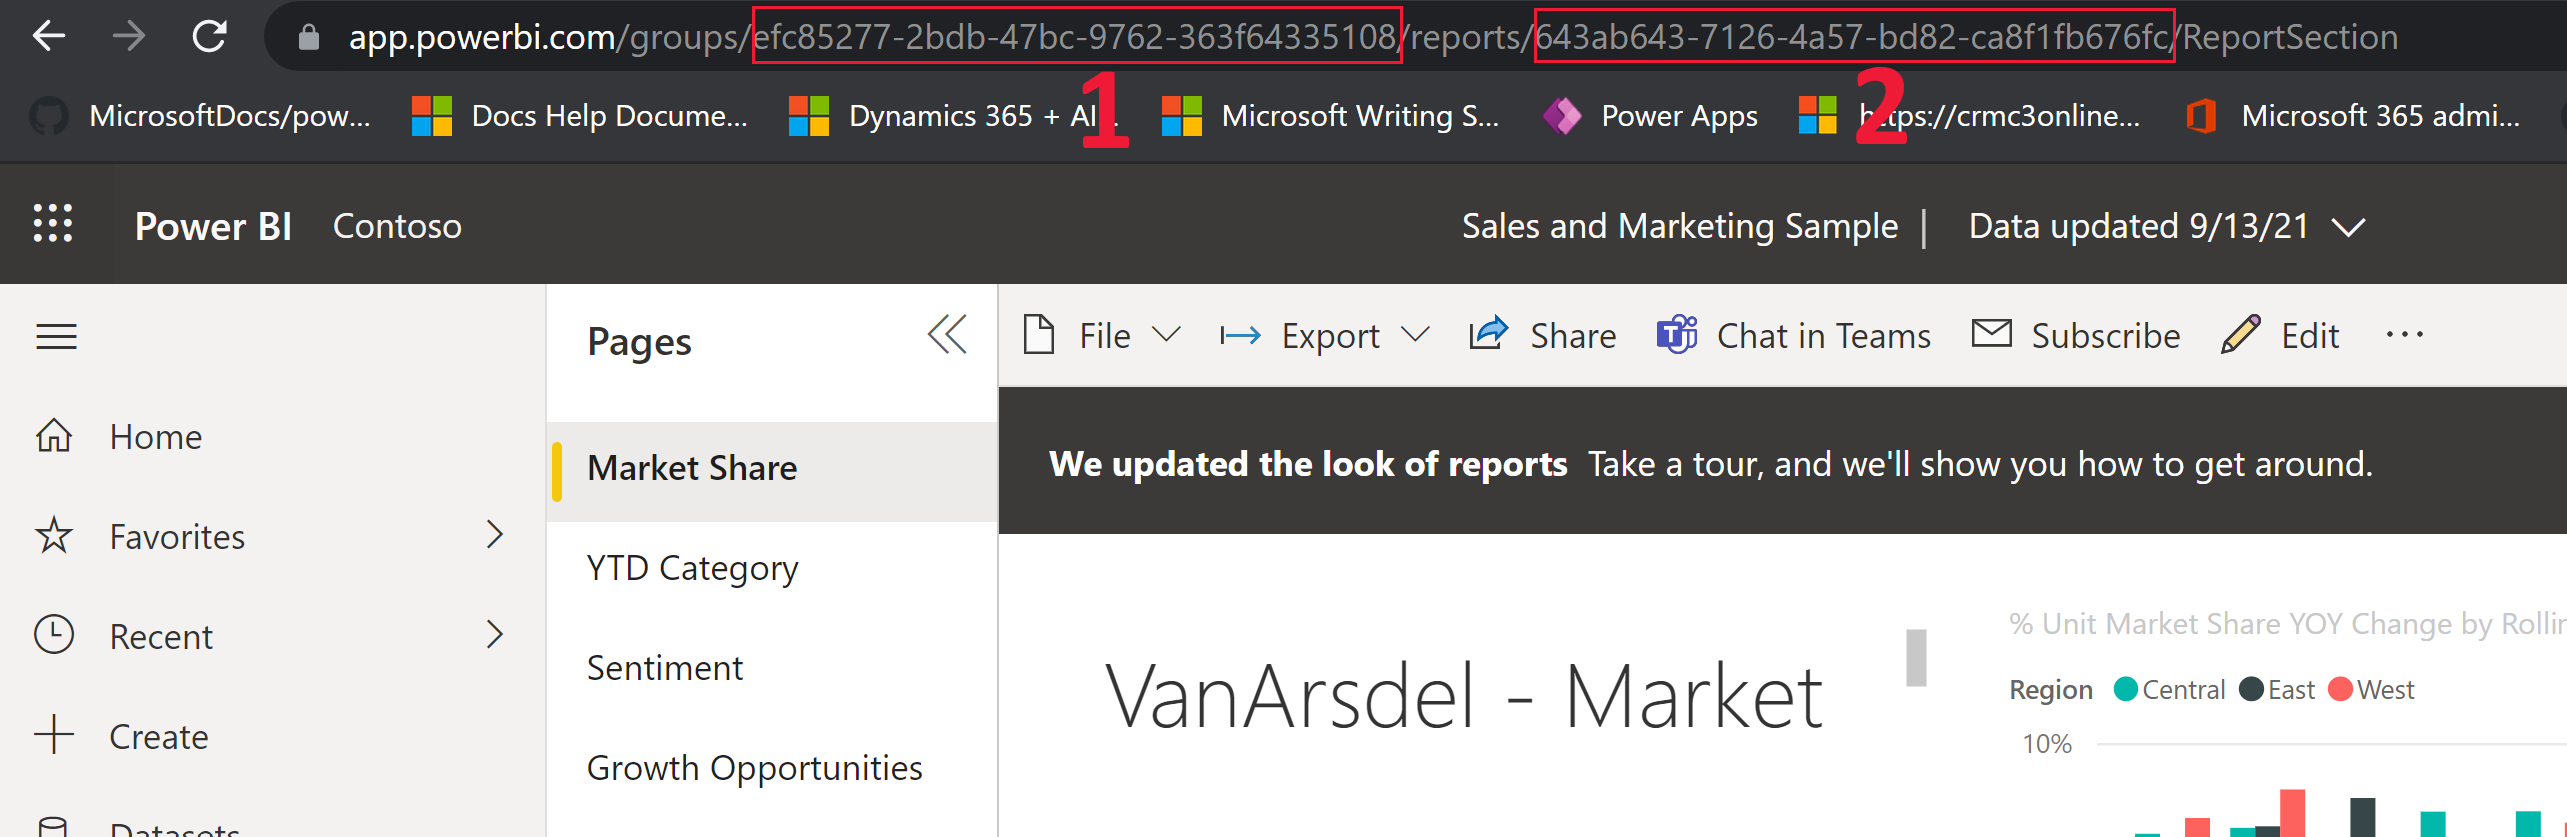 Power BI workspace Id and report Id example